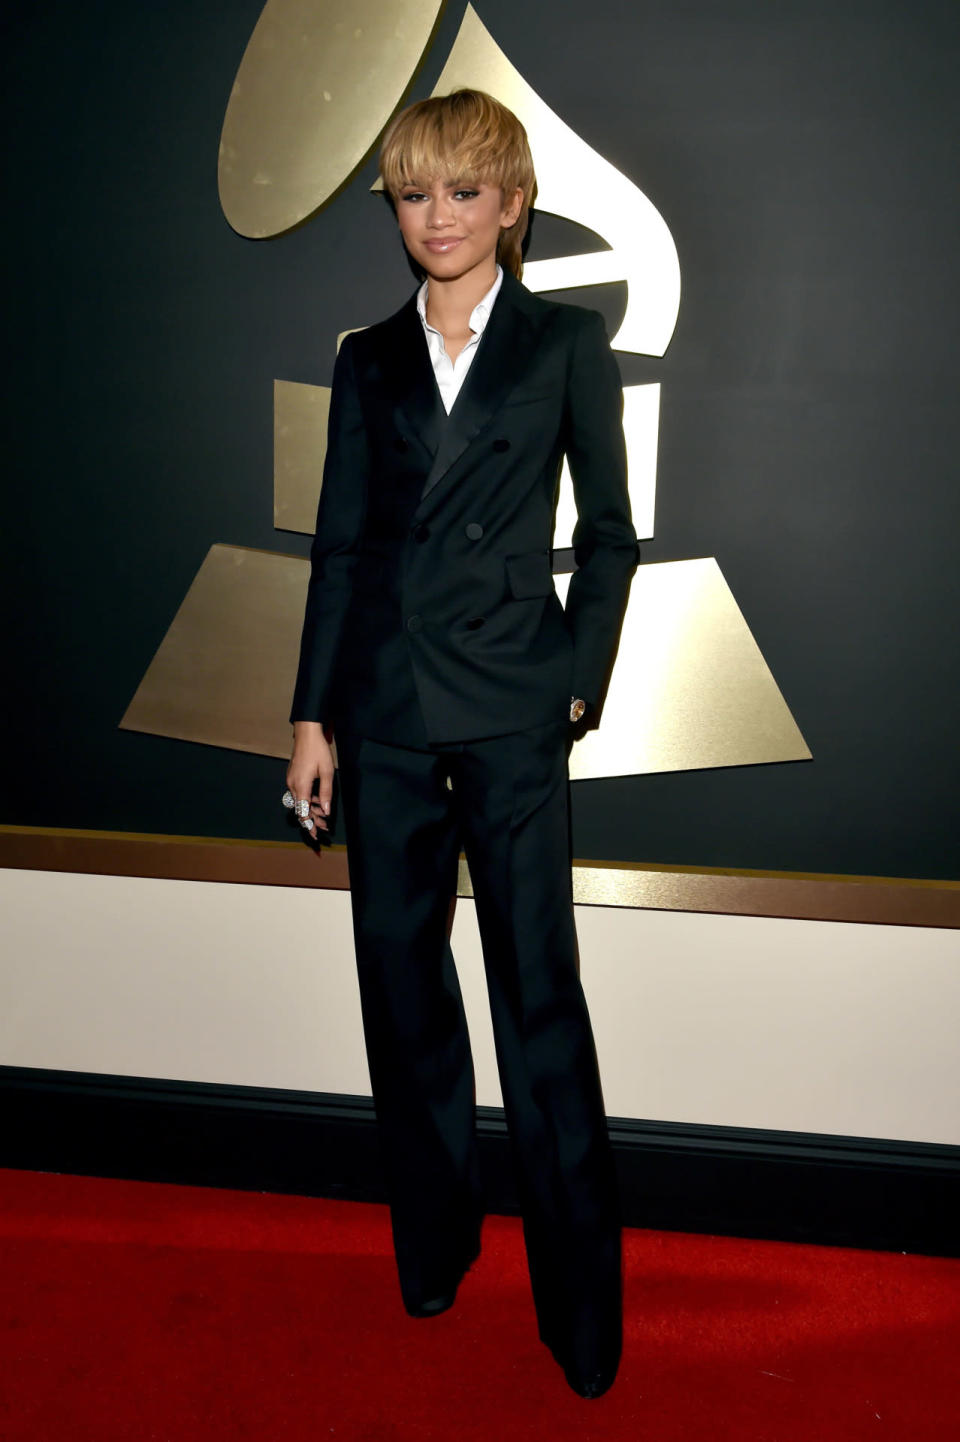 Worst: Zendaya in DSquared2 at the 58th Grammy Awards at Staples Center in Los Angeles, California, on February 15, 2016.